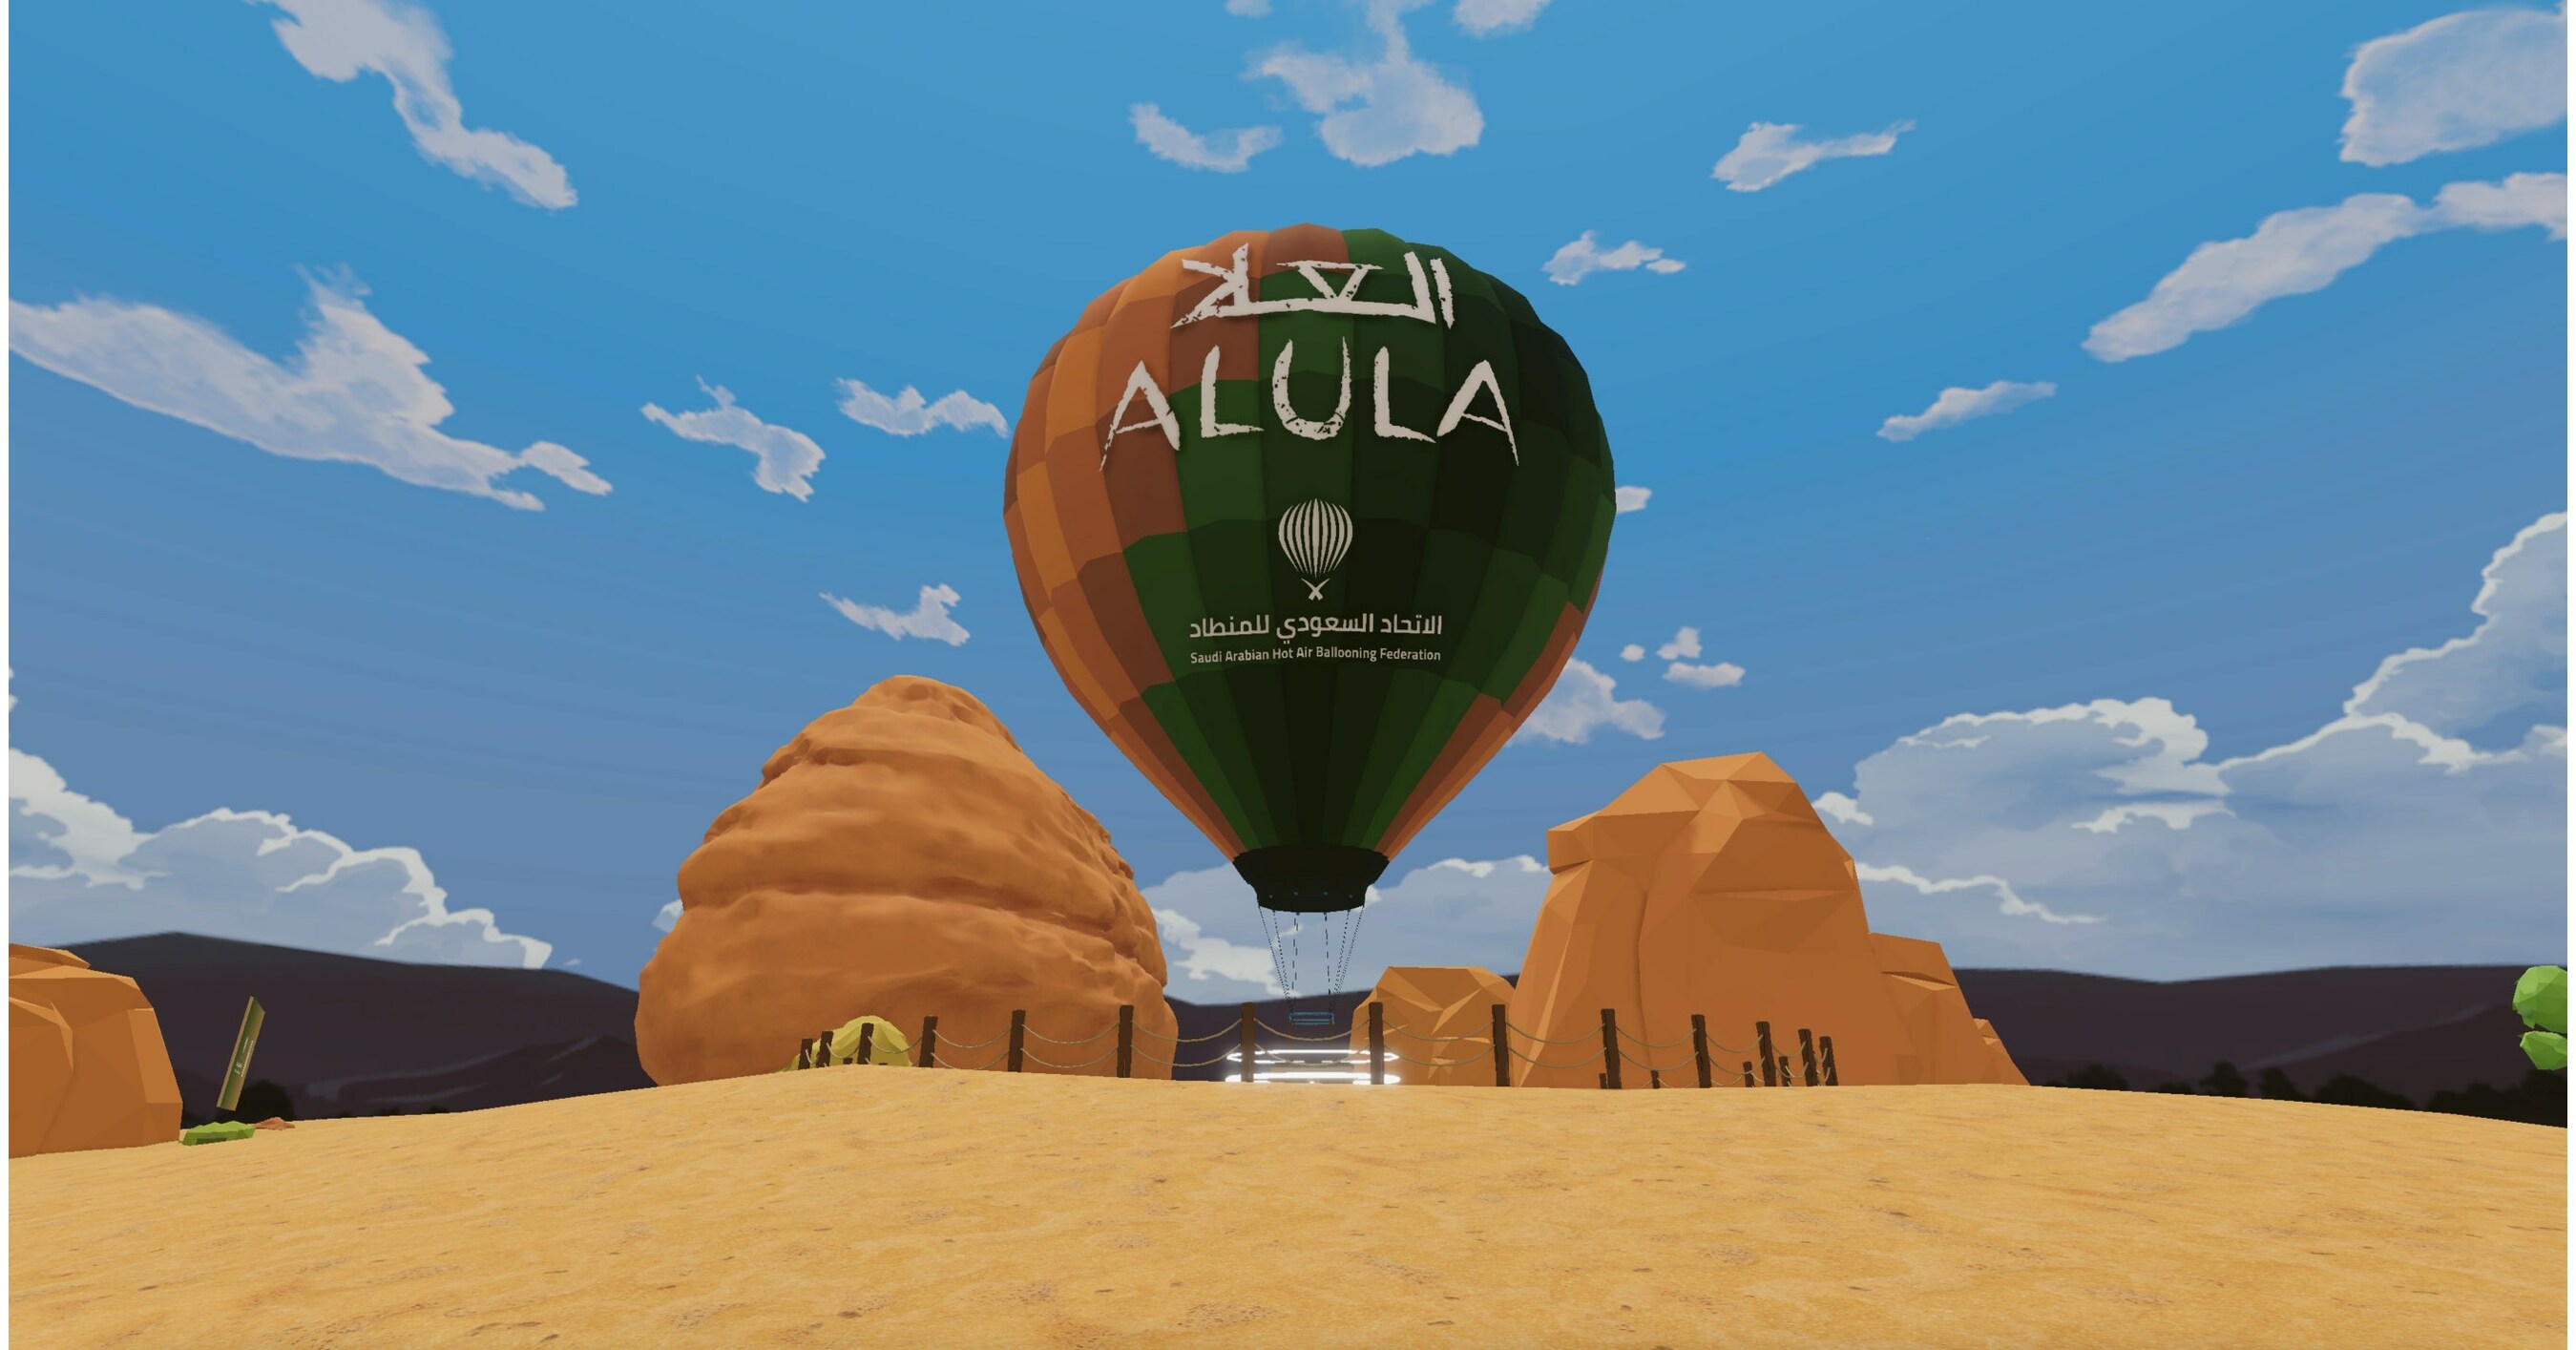 Royal Commission for AlUla's exciting new hot air balloon experience